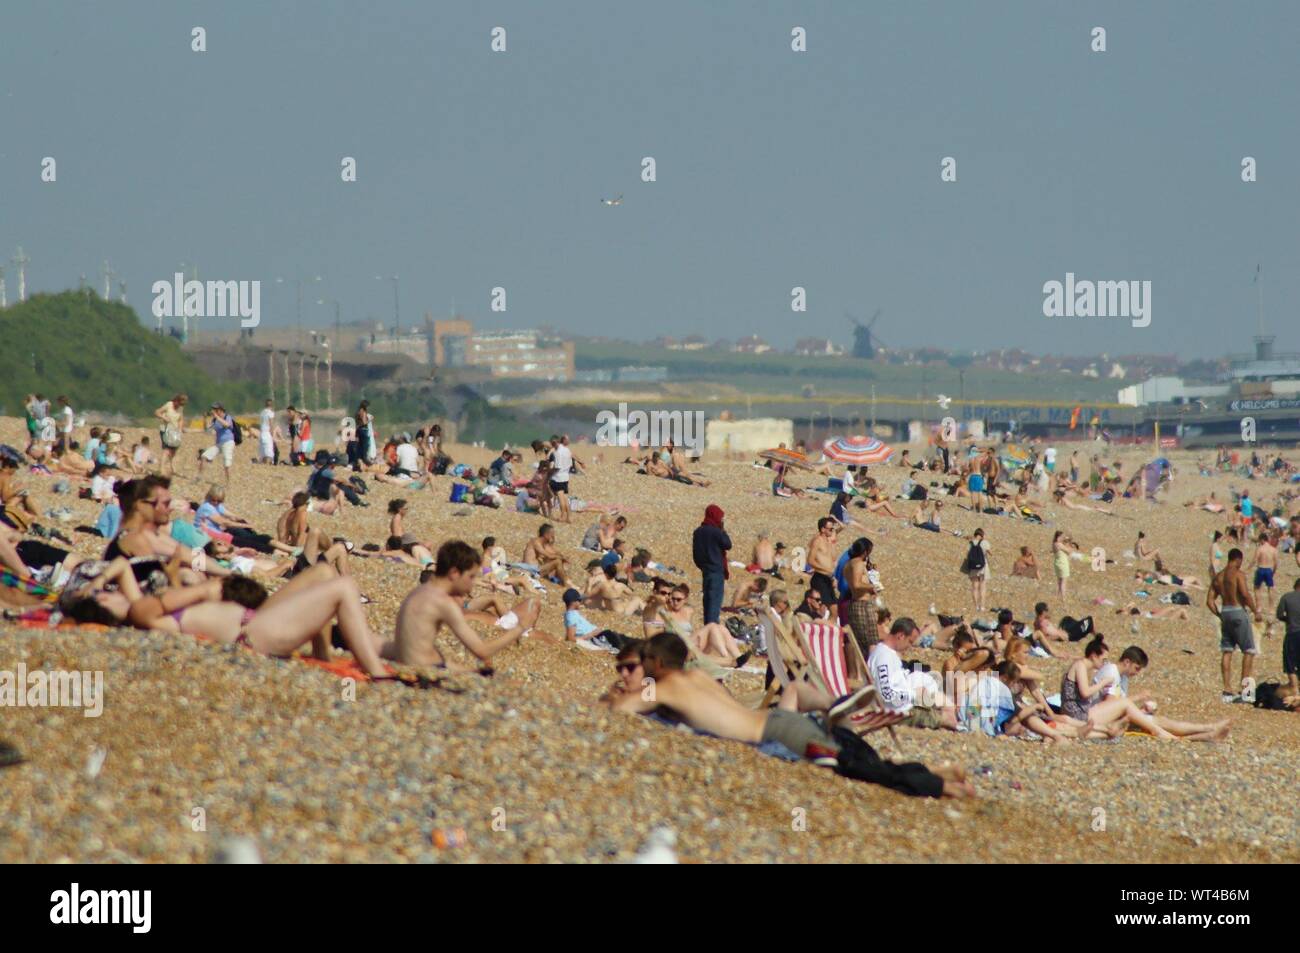 View Of Overcrowded Beach Stock Photo